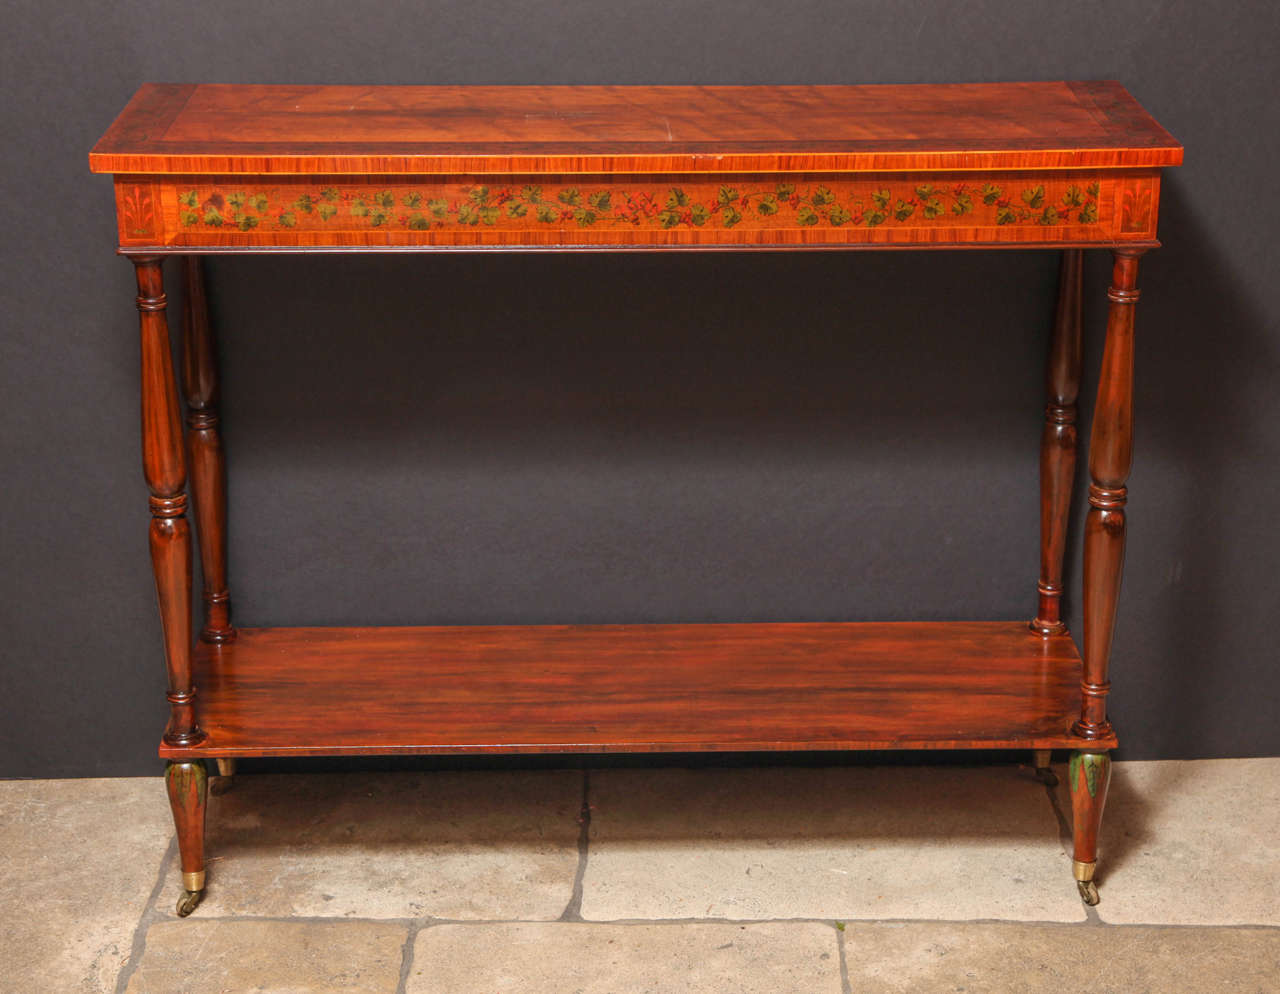 A pair of Adam style painted and crossbanded satinwood console or side tables with scolling foliate decorated top and frieze on turned supports with a shelf stretcher and tapering feet ending in casters.